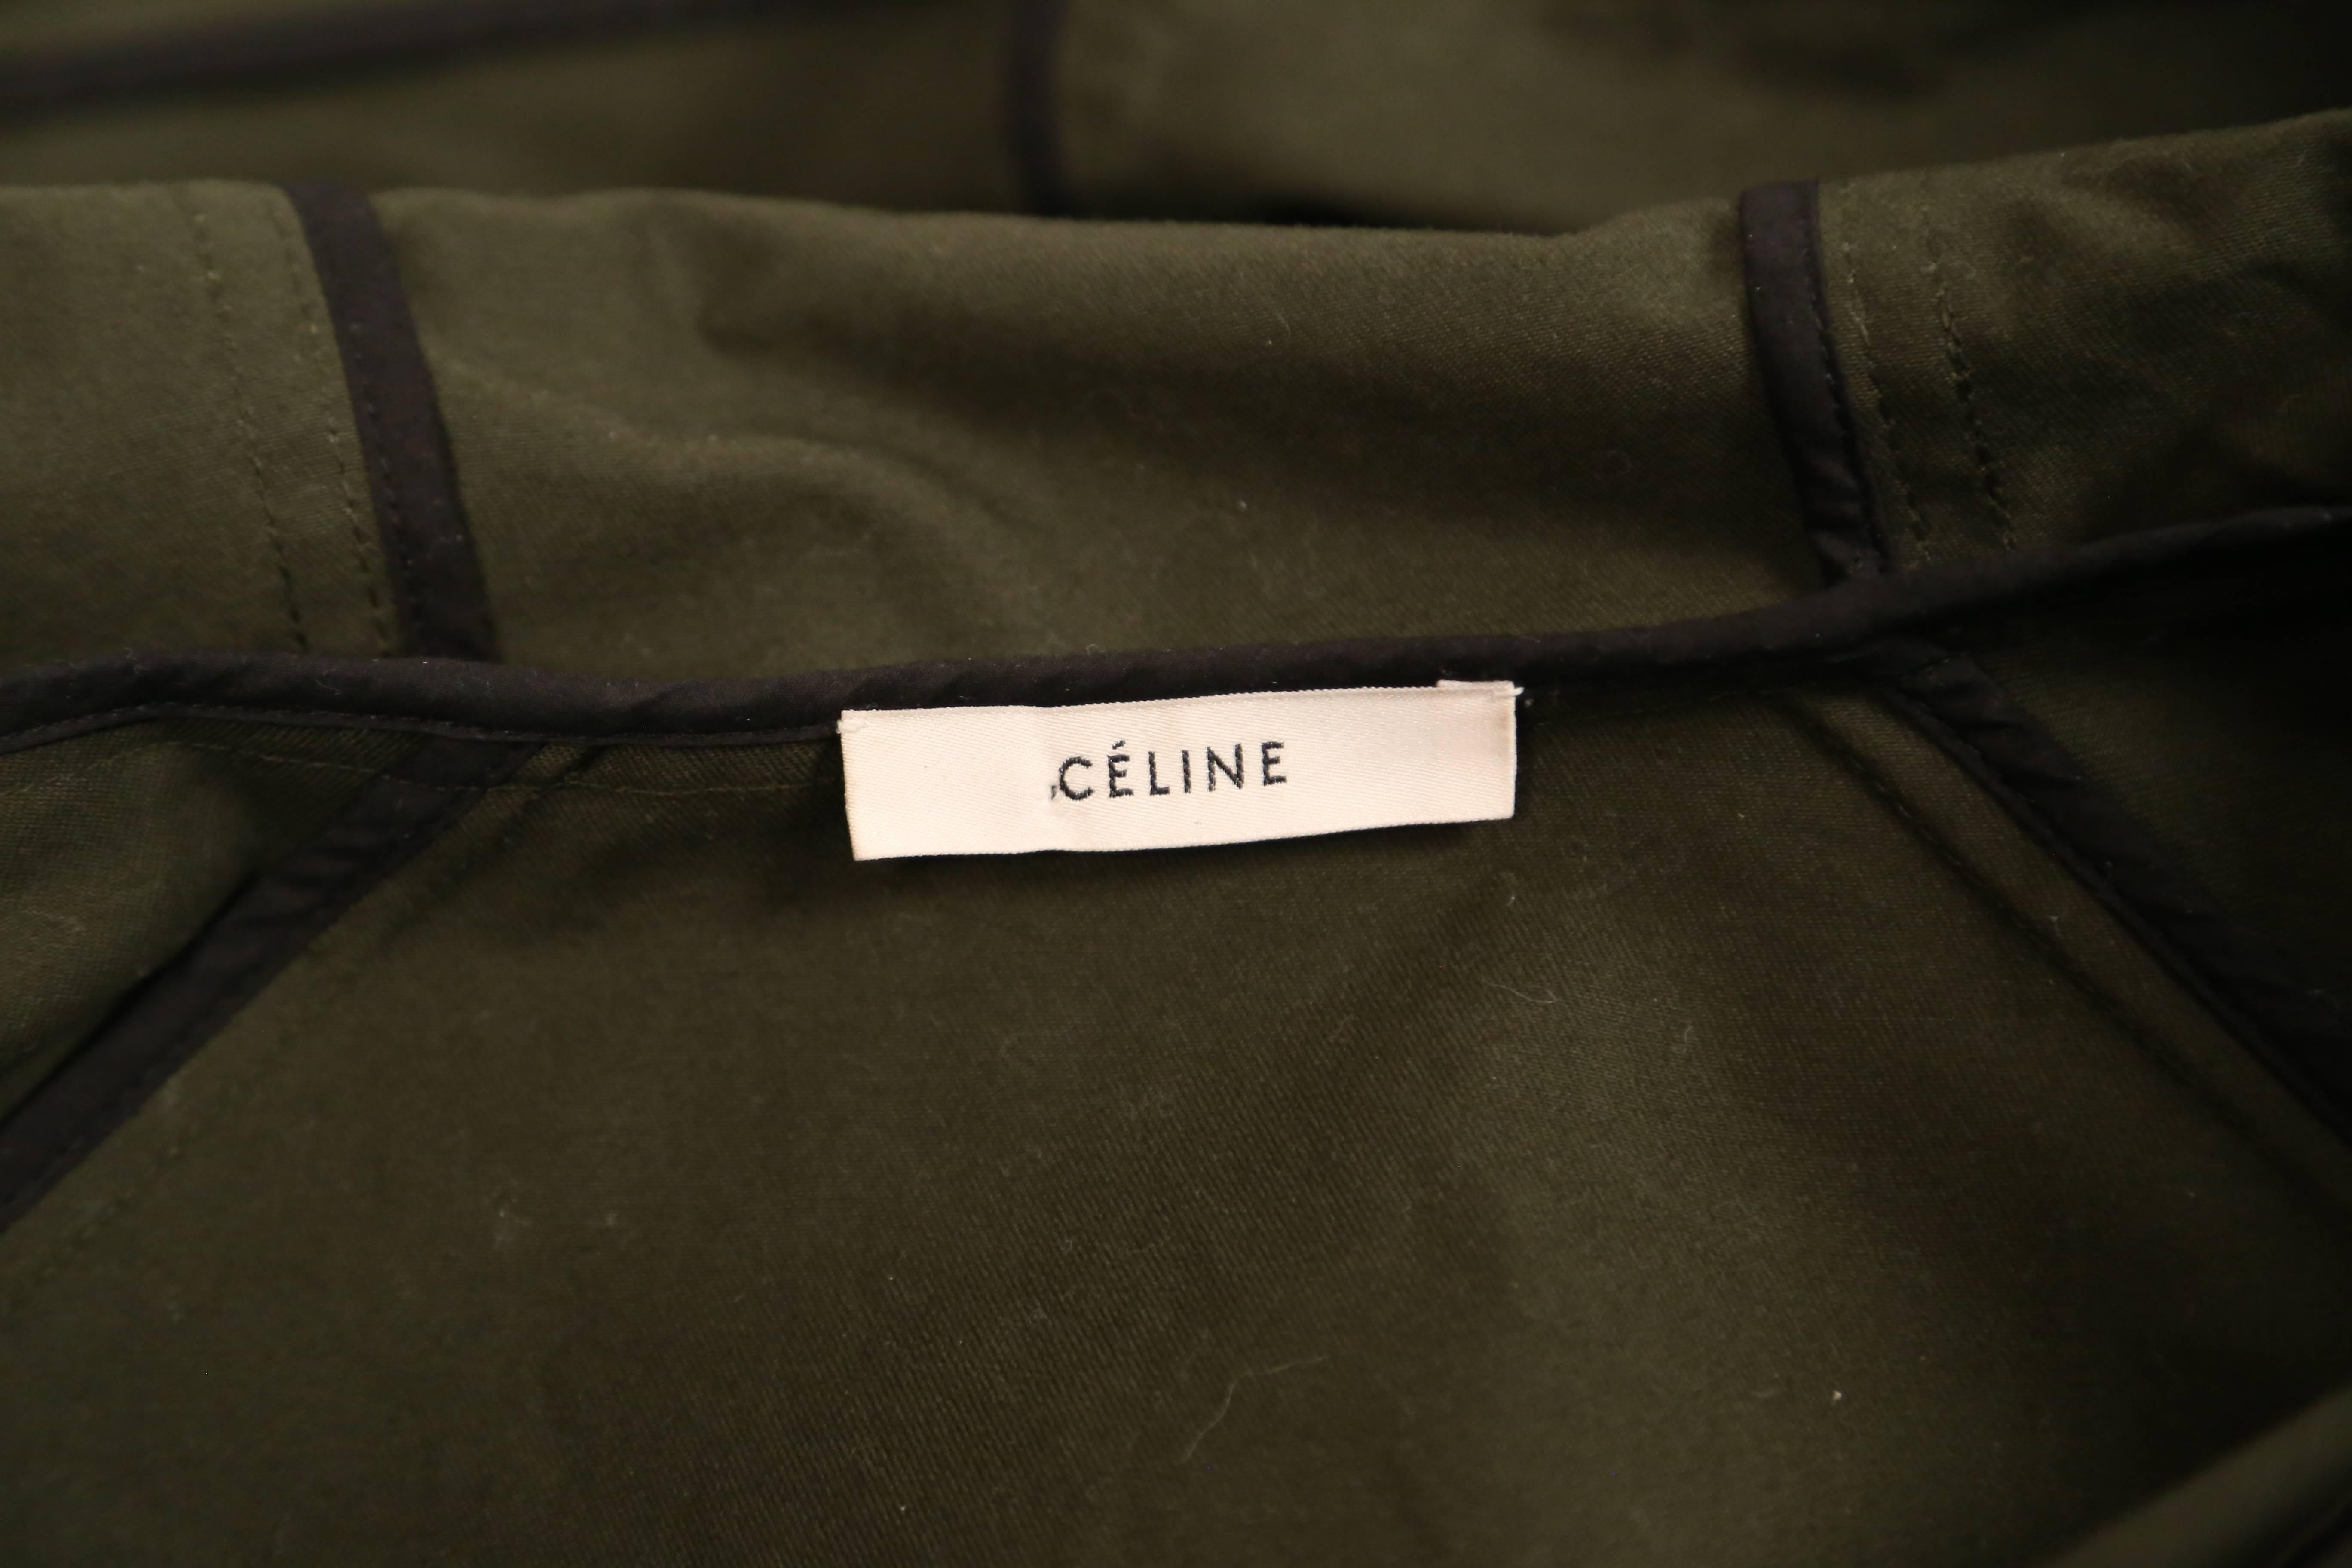 Celine By Phoebe Philo army green anorak jacket in polished cotton For Sale 2